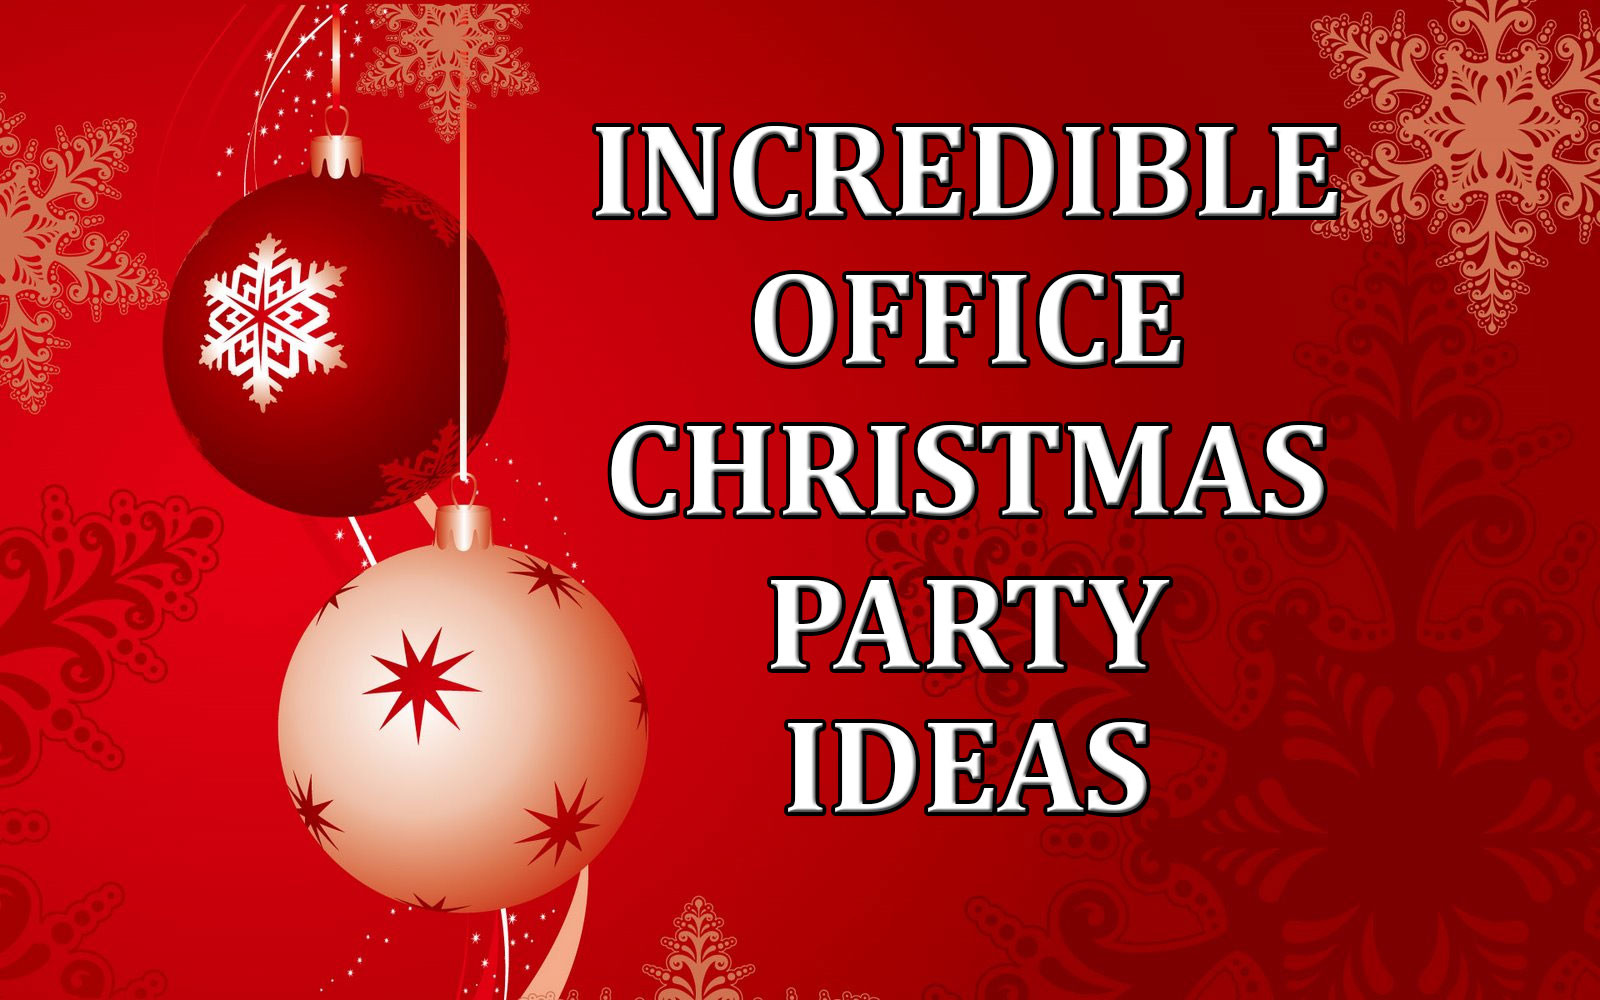 Small Holiday Party Ideas
 Incredible fice Christmas Party Ideas edy Ventriloquist